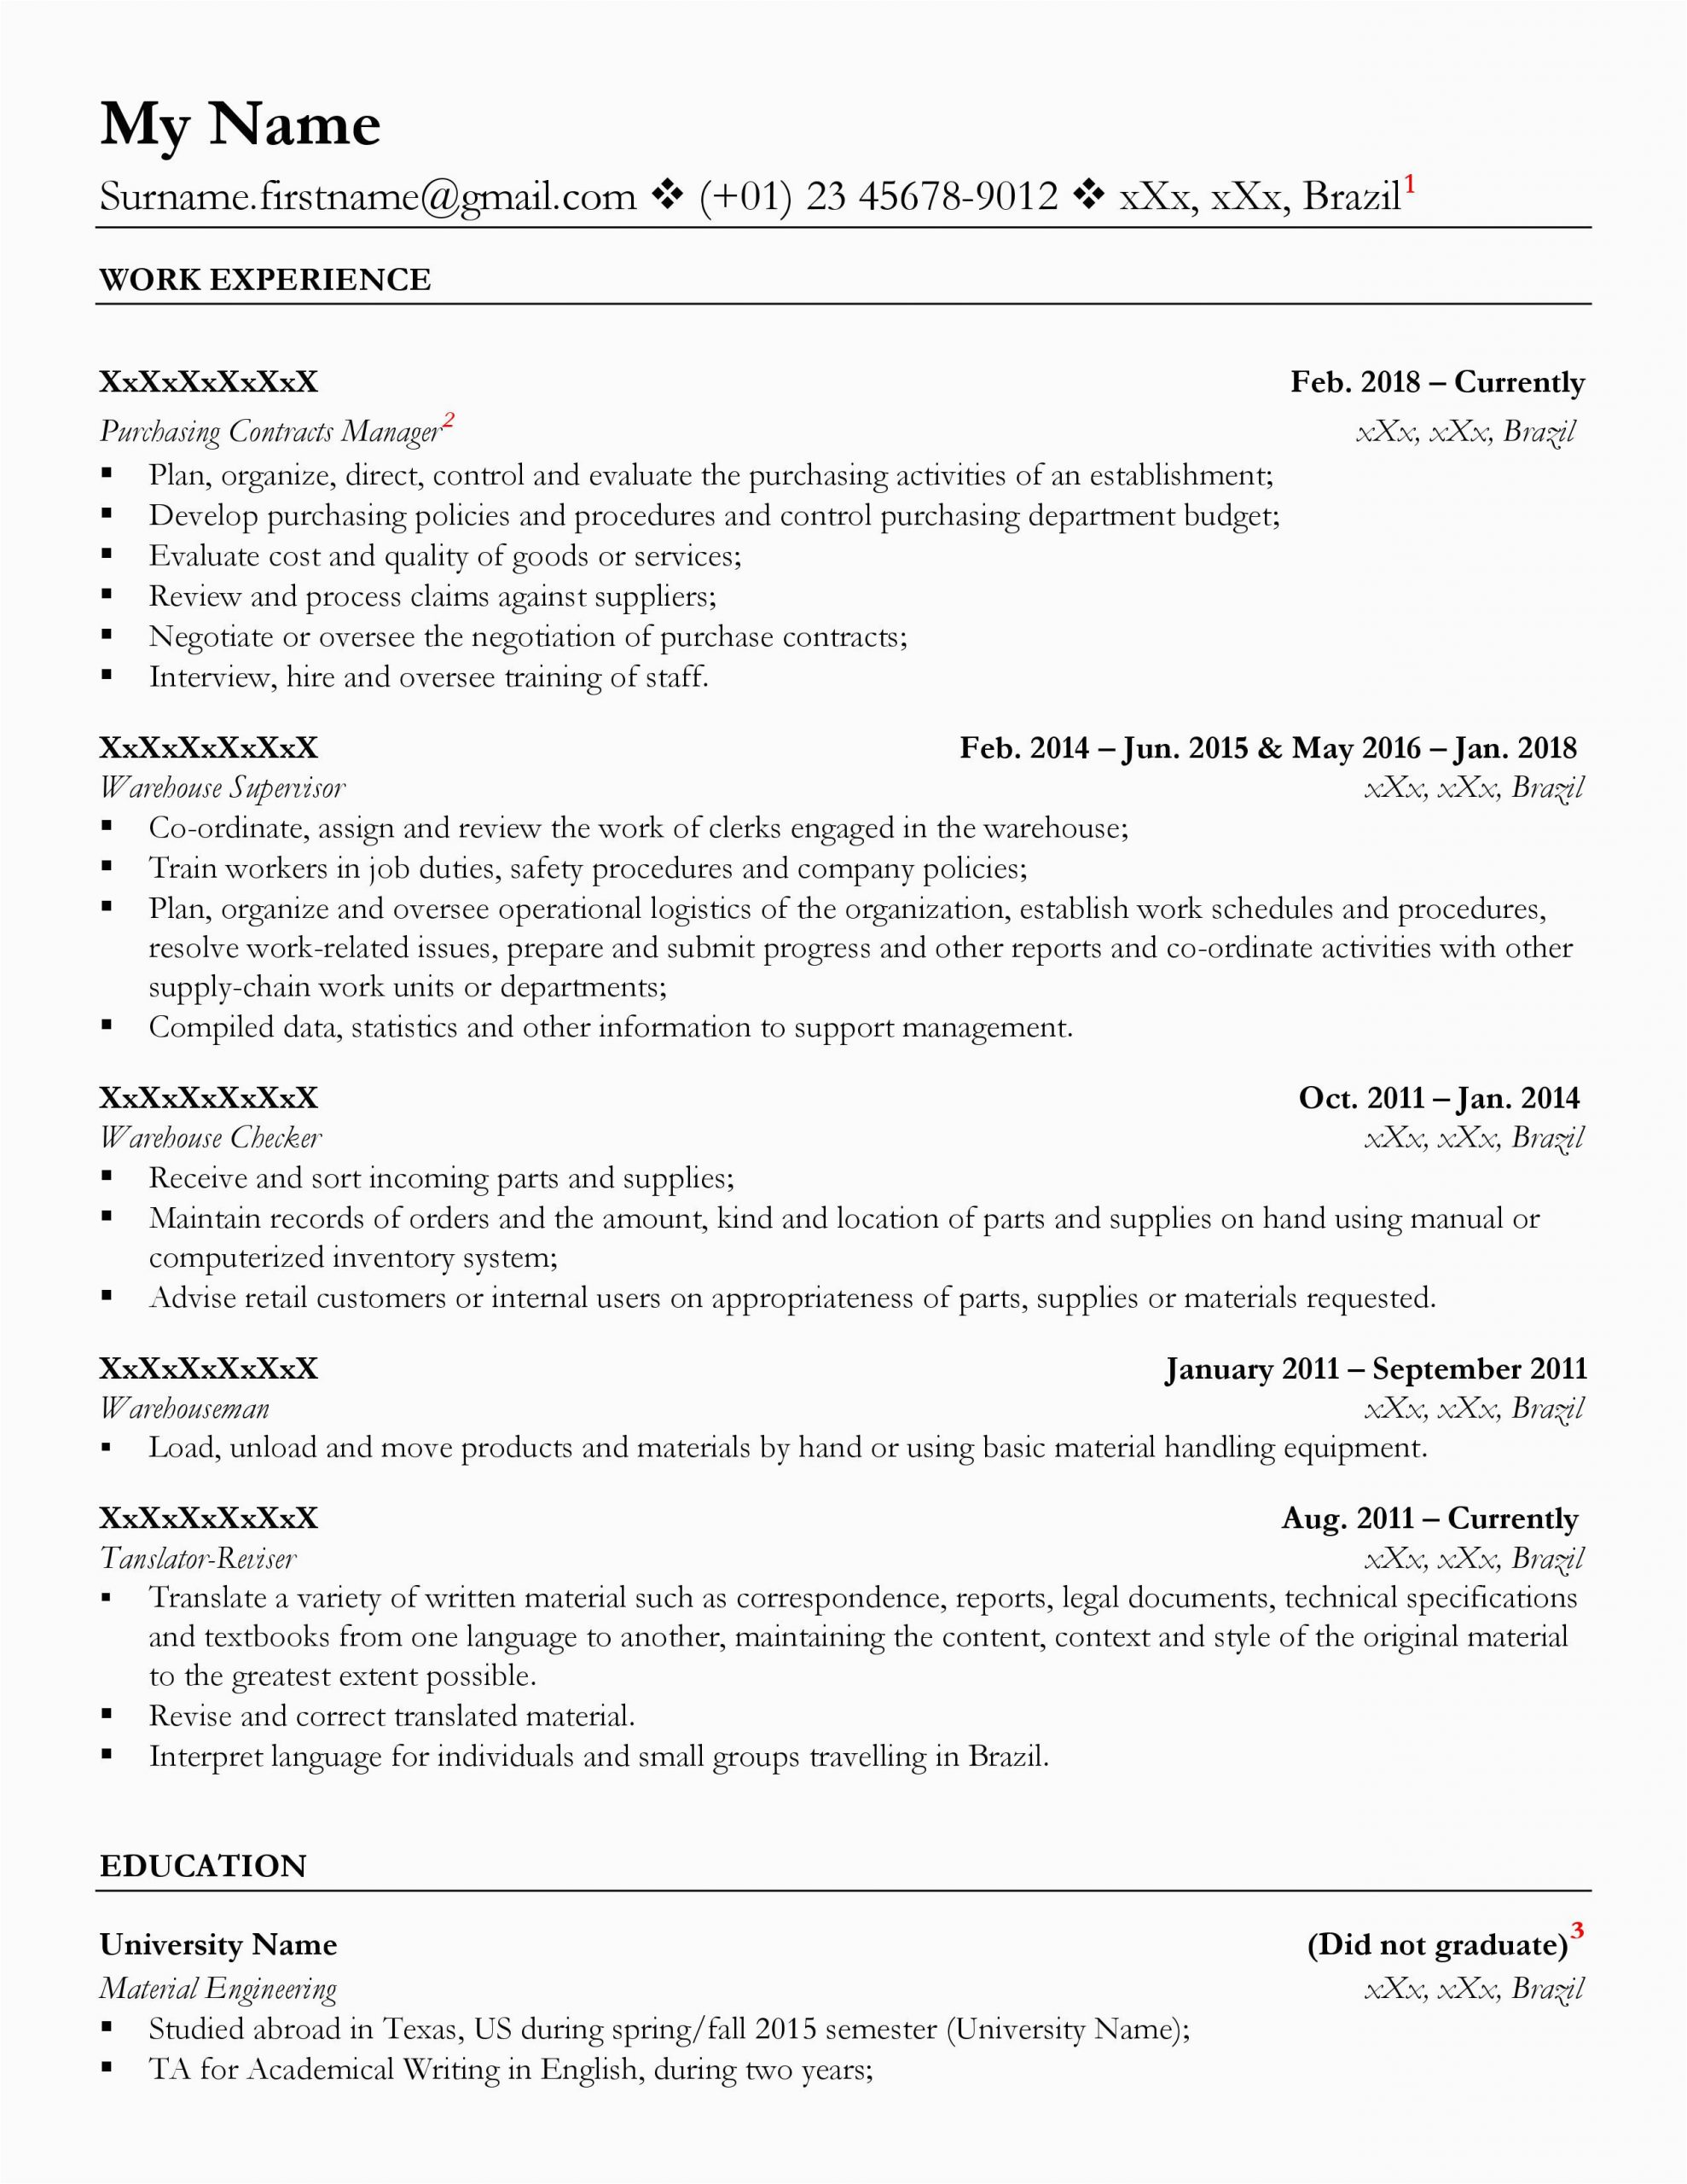 Sample Resume for Canada Post Job is My Résumé Good Enough for Canada Resumes